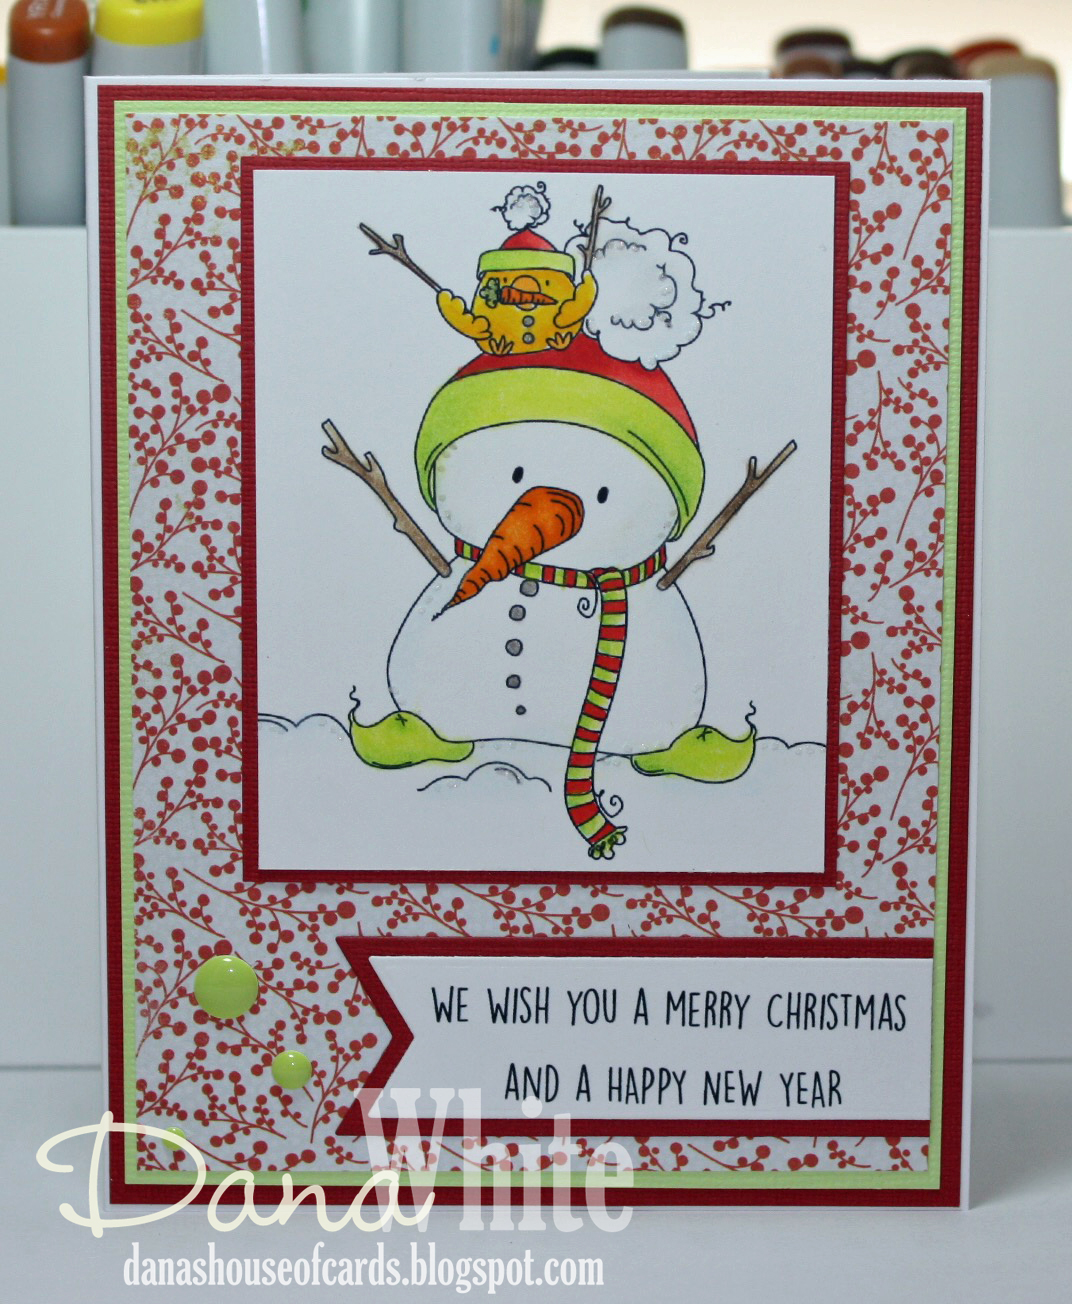 STAMPING BELLA HOLIDAY RELEASE-SNOWMAN with a CHICK ON TOP